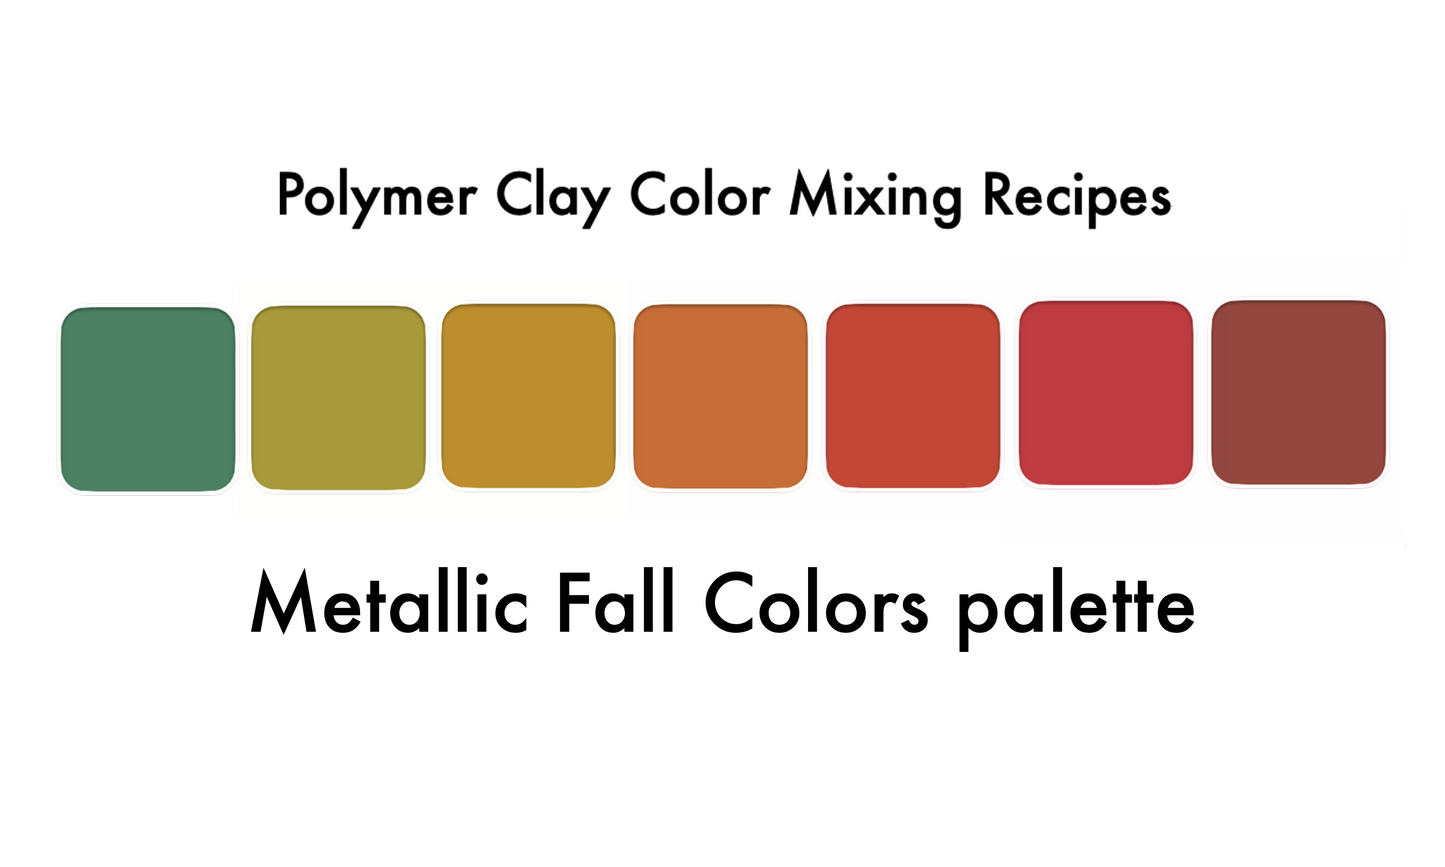 Polymer clay recipes for Sculpey Premo clay - Metallic Fall Colors